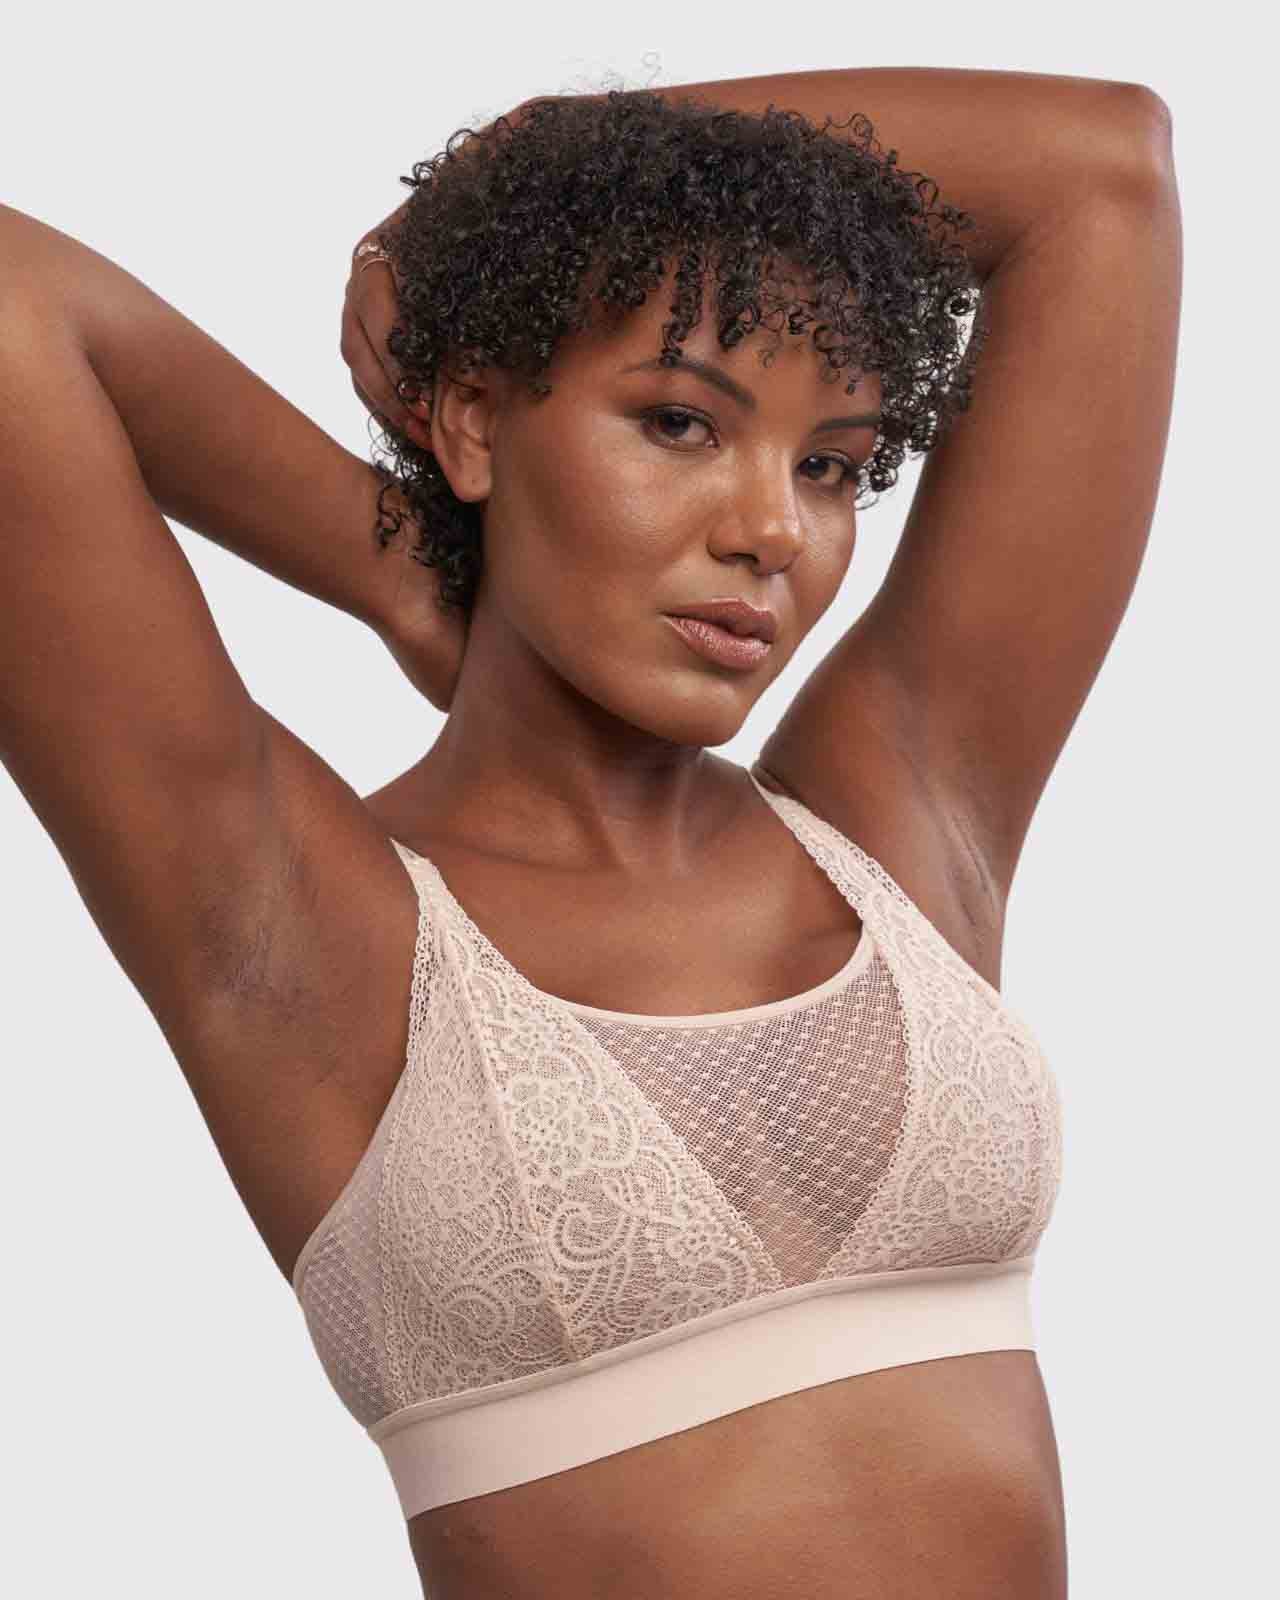 Anaono Women's Maggie Sexy Post-mastectomy Lace Bralette Champagne - Medium  : Target